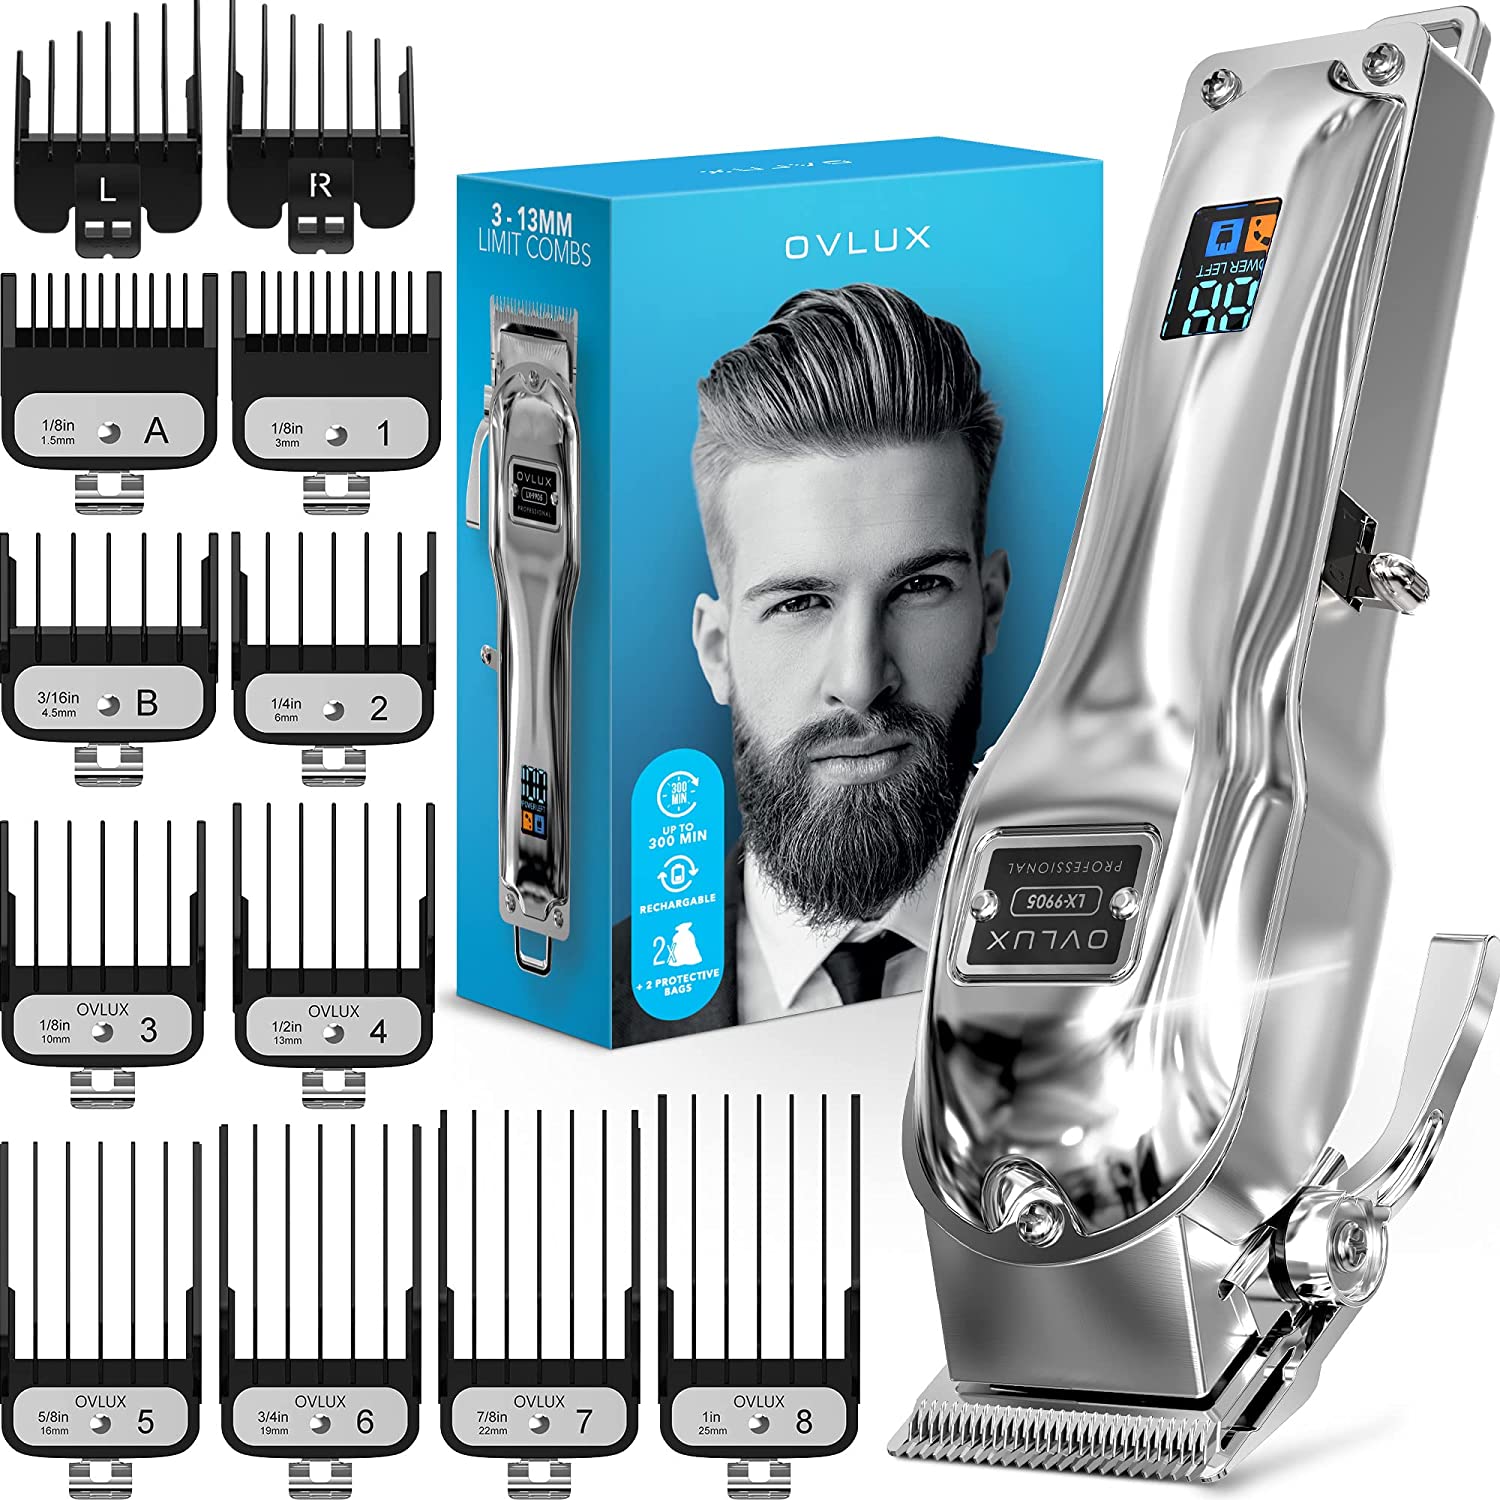 OVLUX Hair Clippers for Men - Professional Cordless Rechargeable Clippers for Hair Cutting, Full Metal Beard Trimmer, Barbers Trimmer, Birthday Gifts for Men, Gifts for Him Dad, Silver